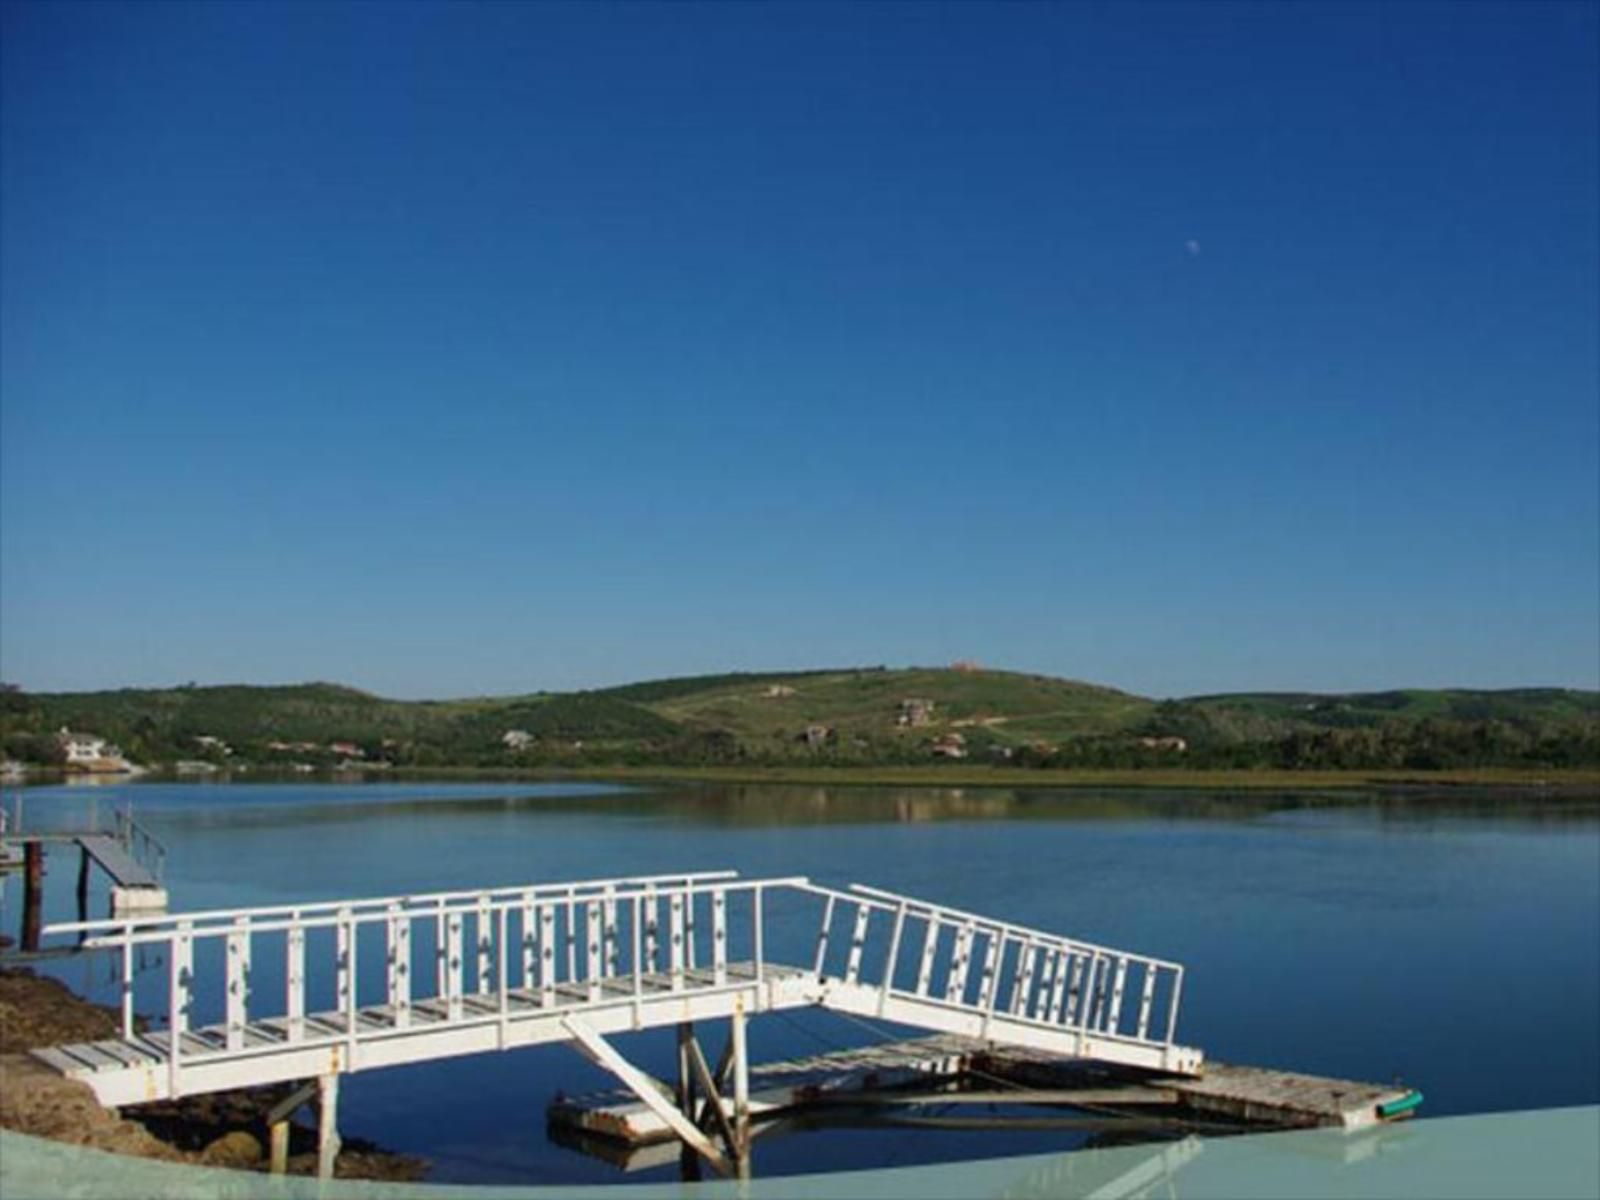 Kowie River Guest House Port Alfred Eastern Cape South Africa Boat, Vehicle, Bridge, Architecture, River, Nature, Waters